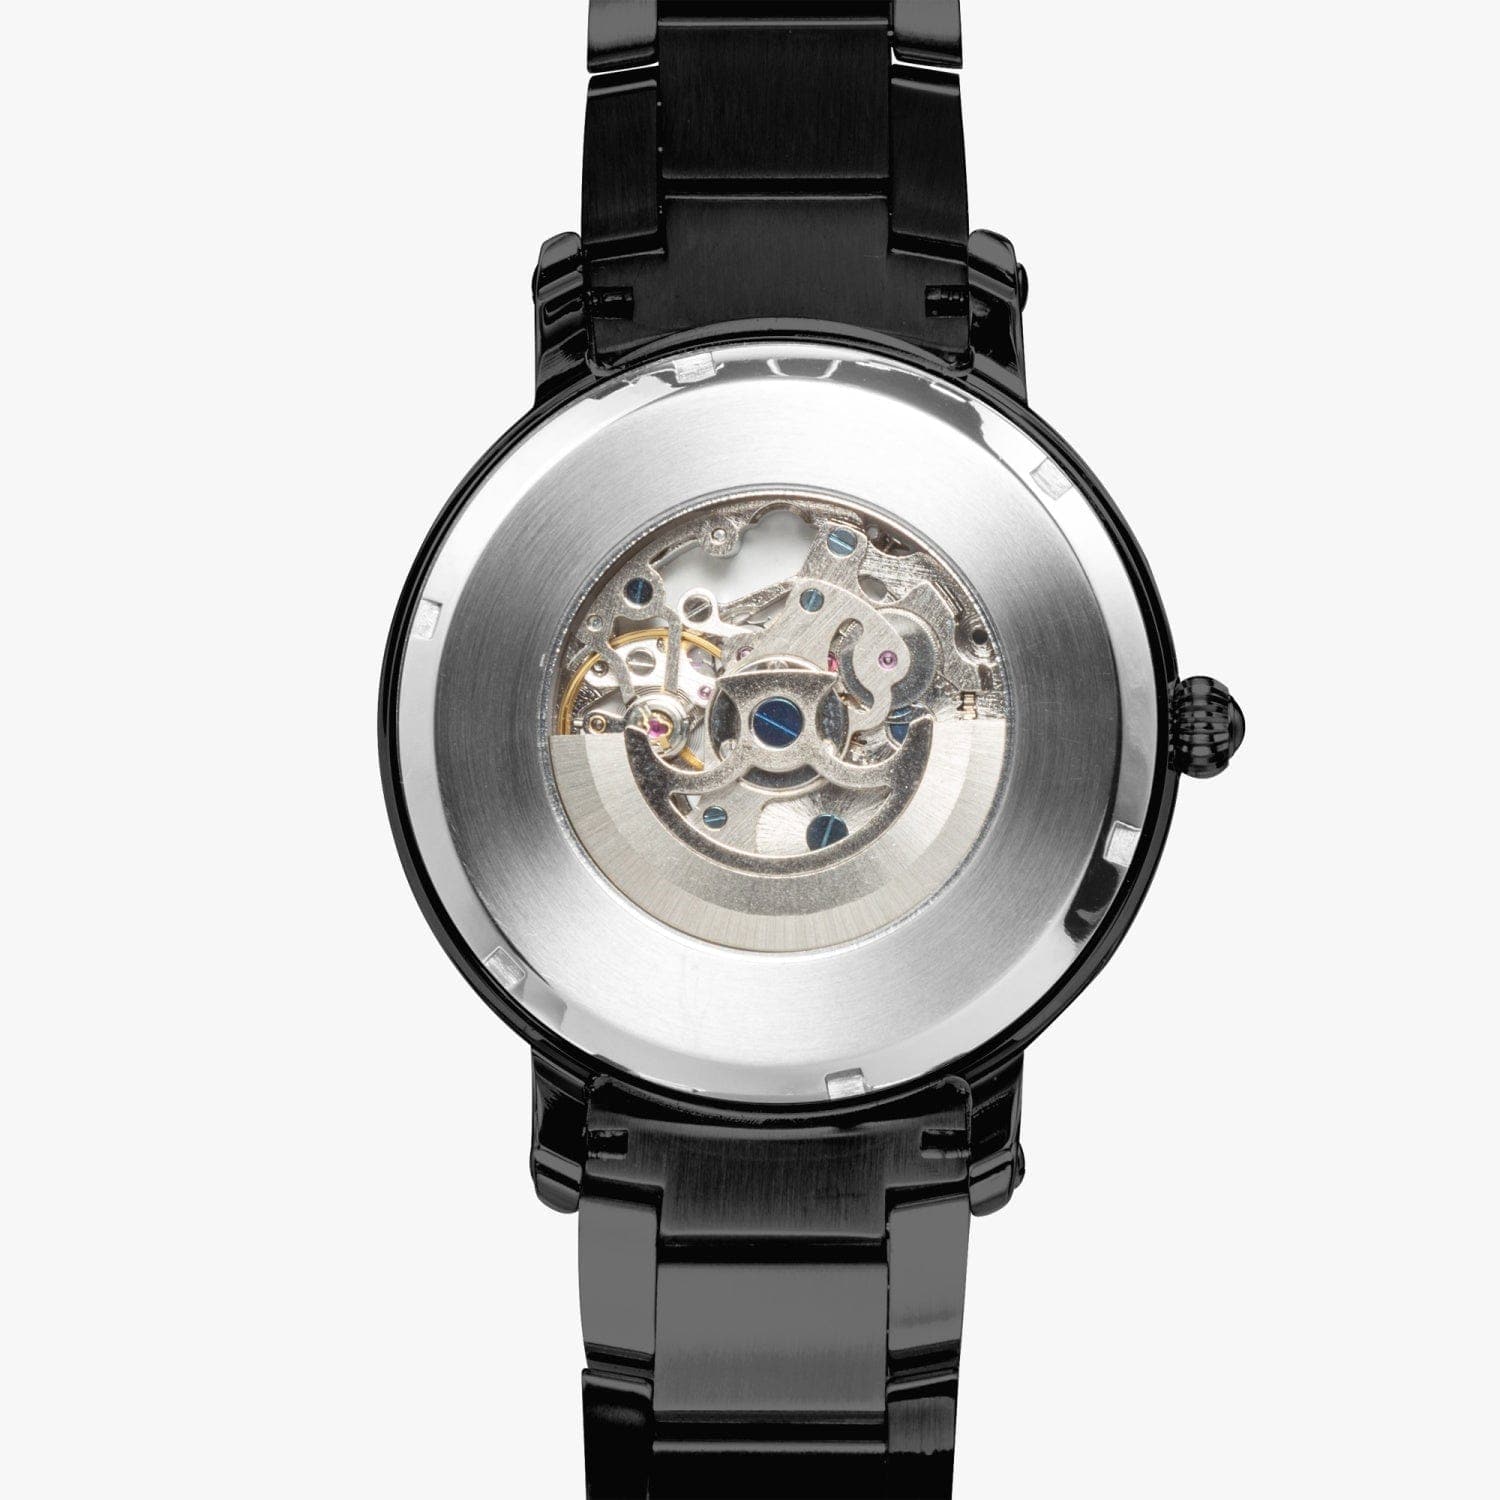 Dark Rose and Gold Damask Patterned New Steel Strap Automatic Watch, by Sensus Studio Design